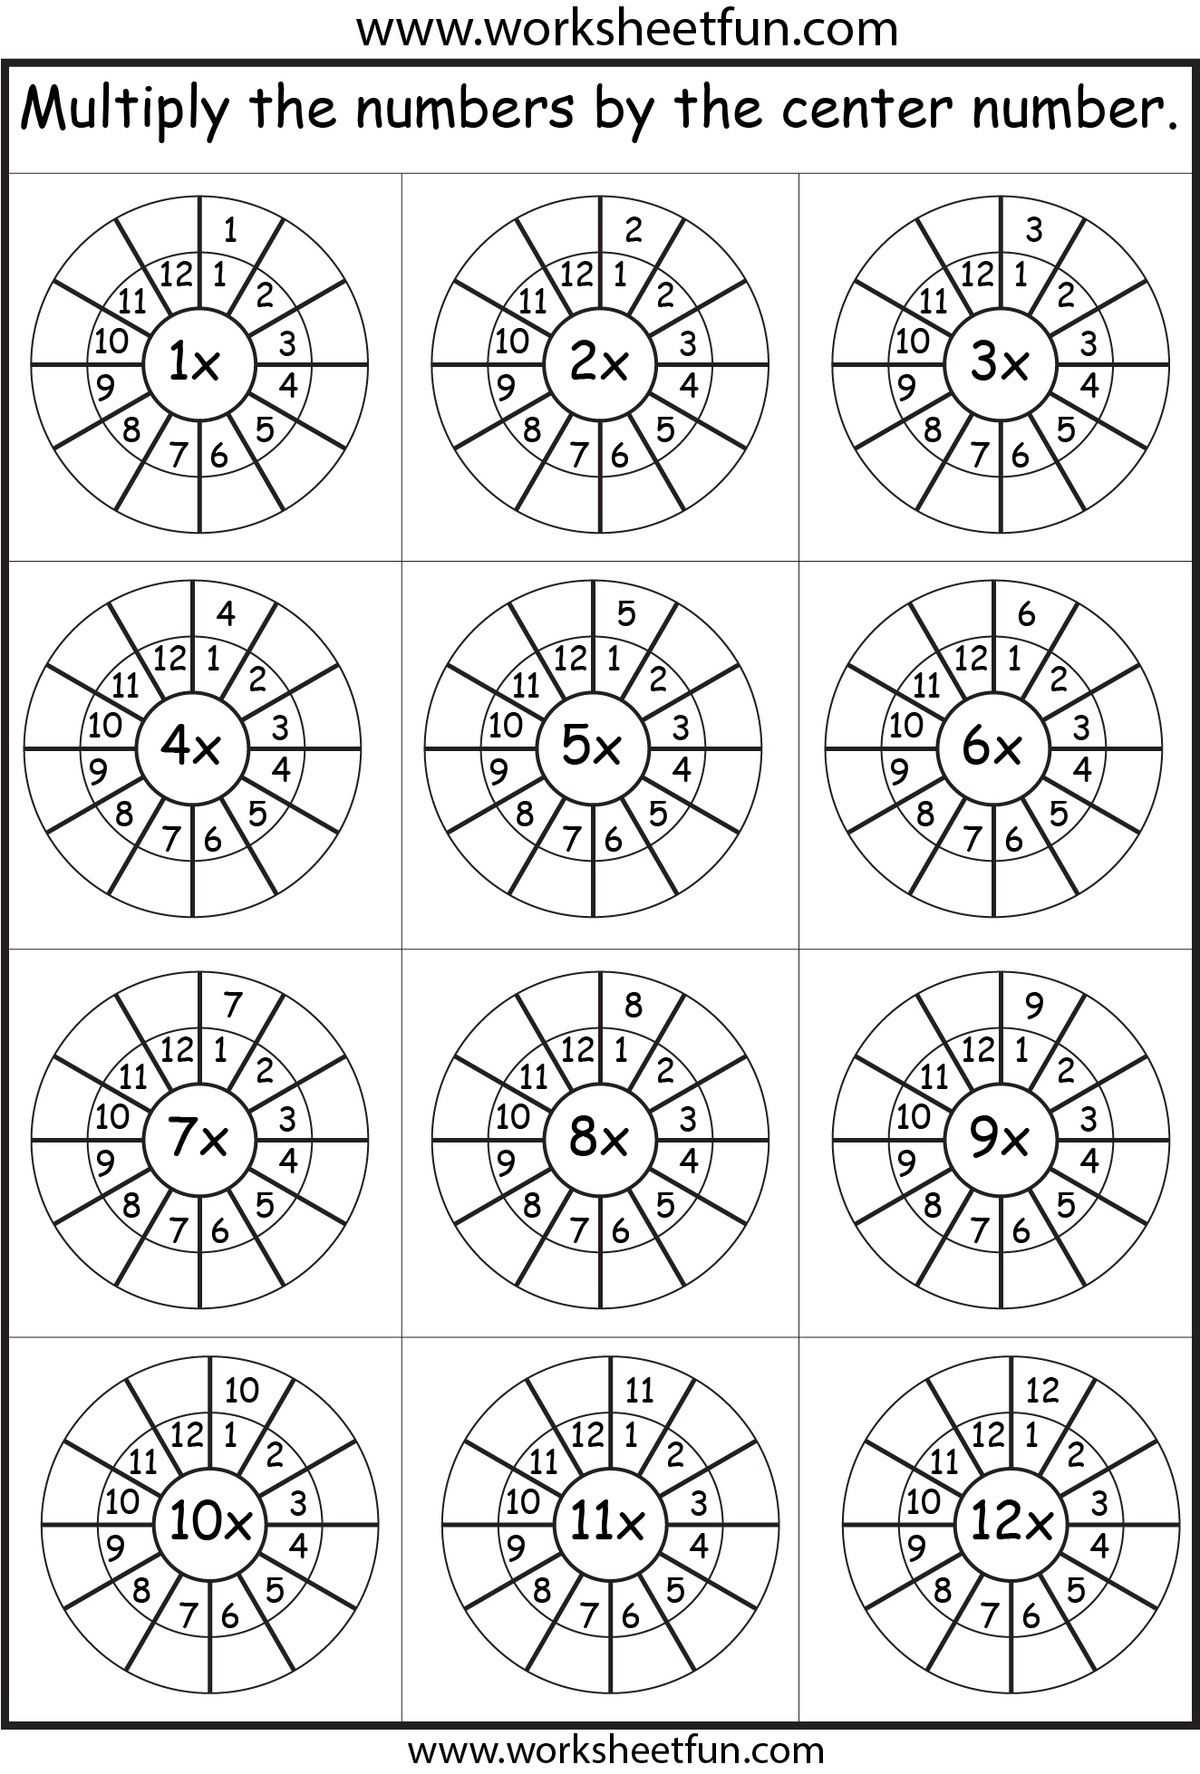 4 30 Spelling Demons Worksheet Answers and Times Table Practice School Goo S Pinterest